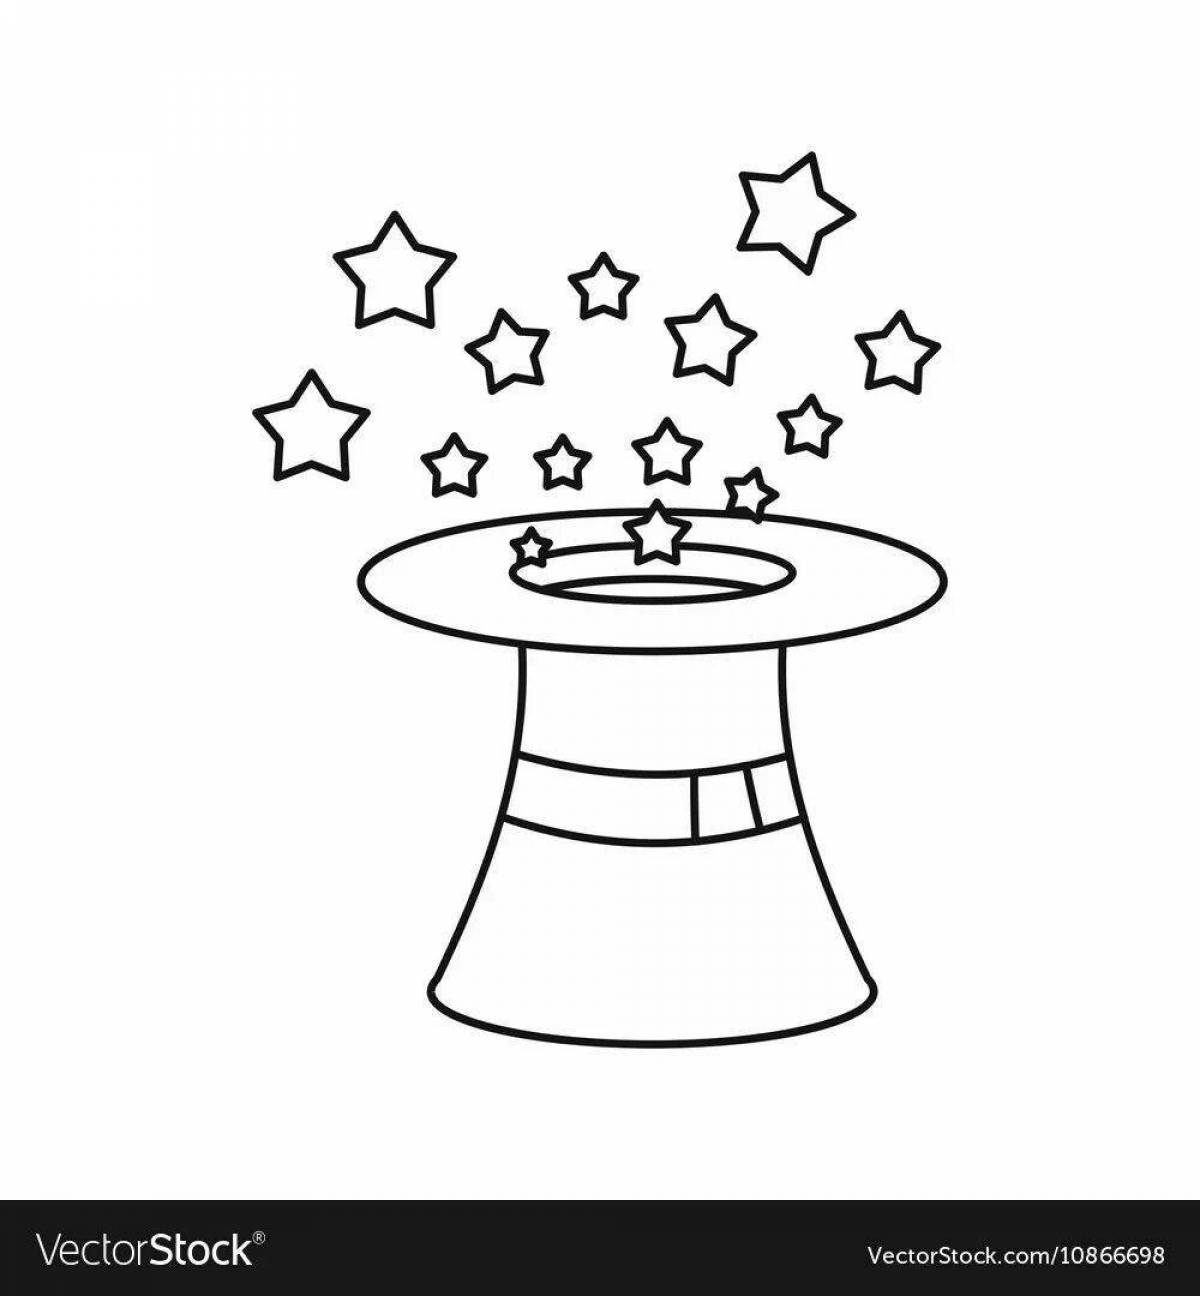 Fancy wizard hat coloring page